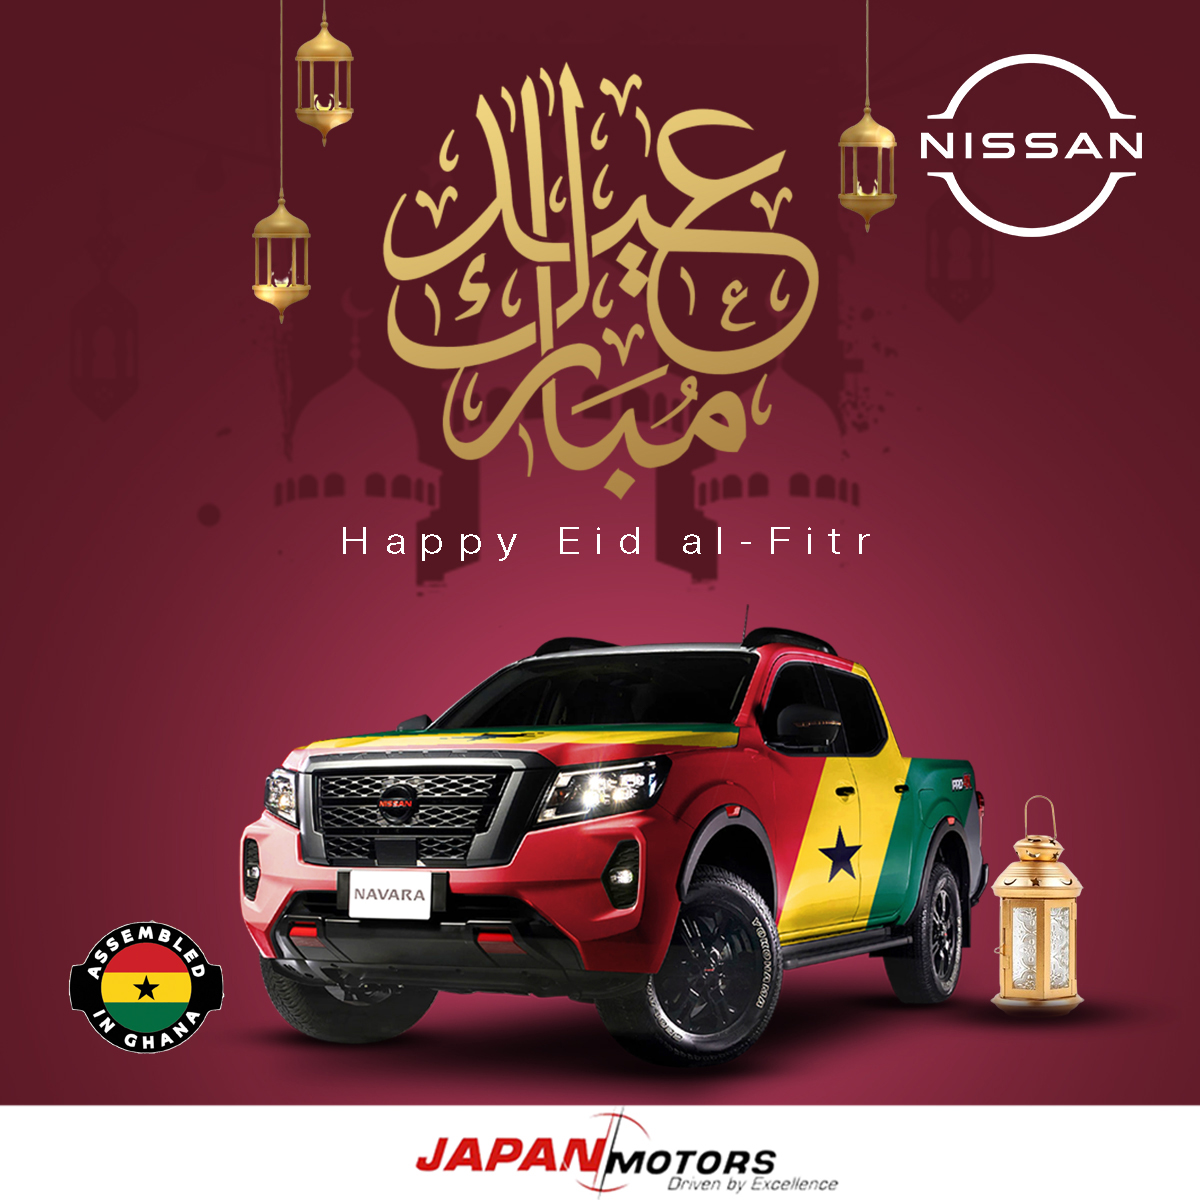 May your homes be filled with laughter, delicious food, and cherished moments with loved ones. Sending warm wishes for a beautiful Eid celebration! 🌙🎊 #JapanMotors #NissanGhana #EidUlFitr #FamilyTime #EidMubarak #Nissan